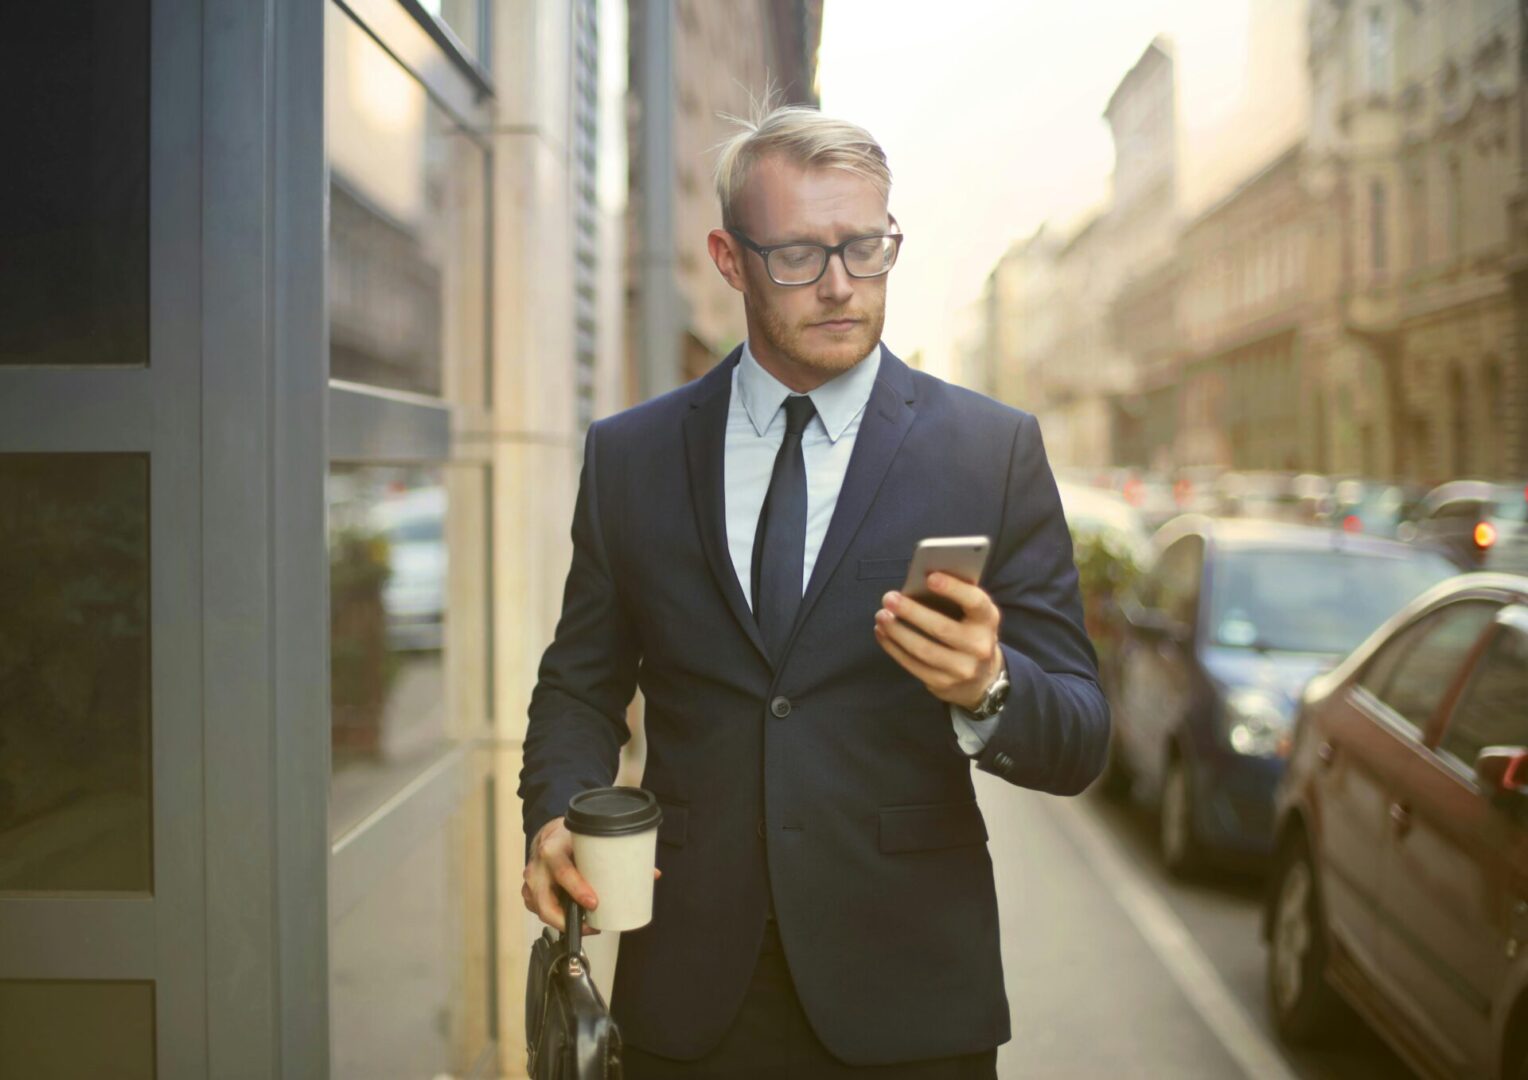 A man in suit and tie holding a coffee cup while looking at his phone.